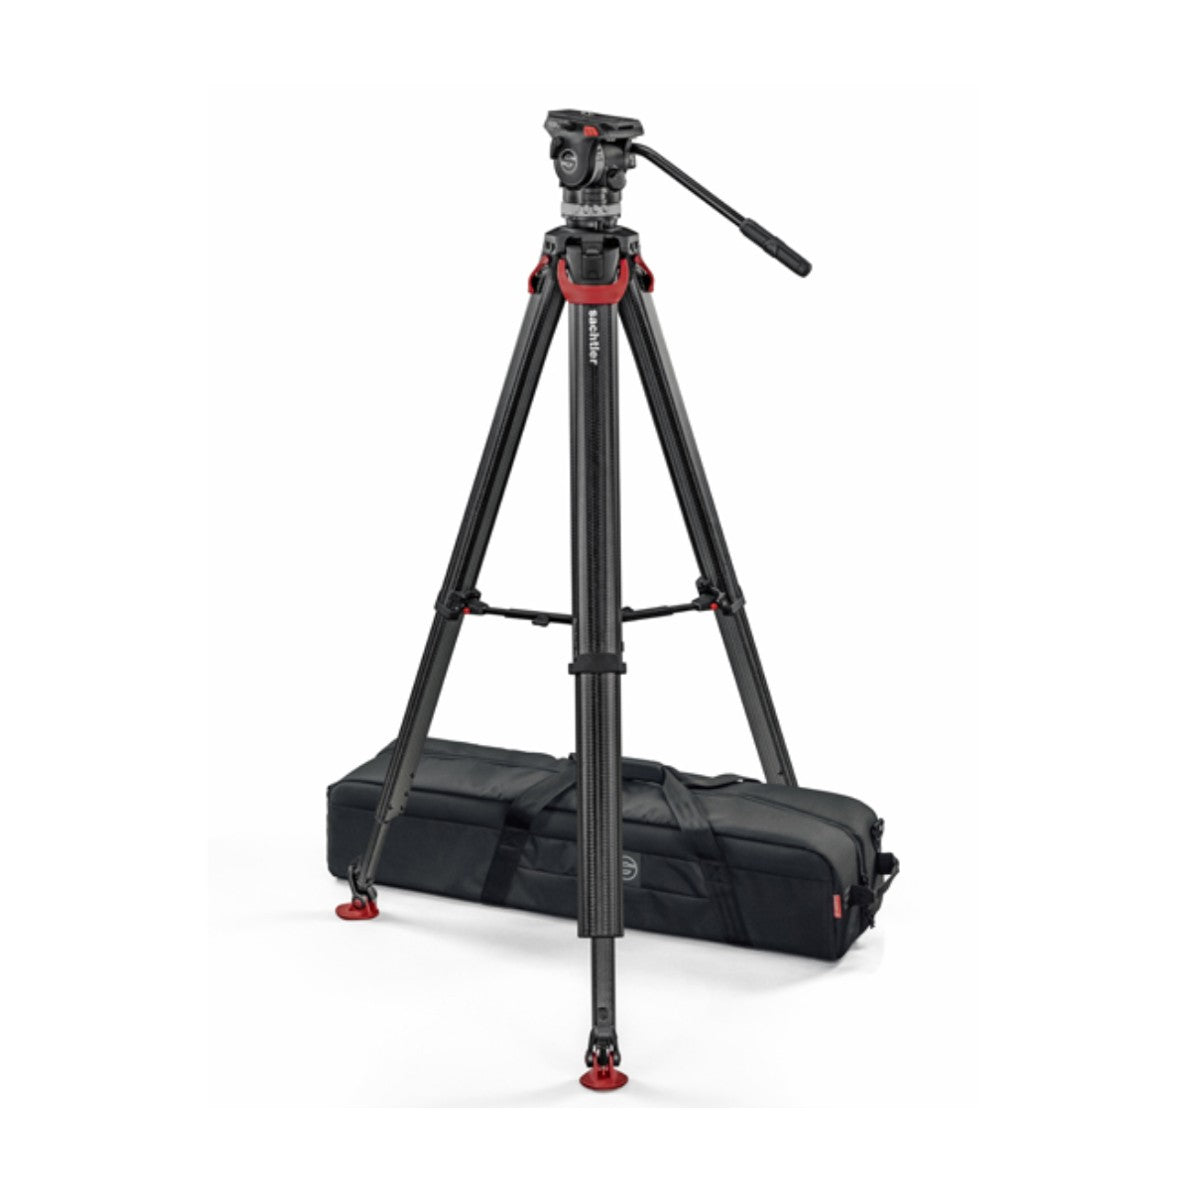 Sachtler ACE XL Tripod System with FT 75 Legs & MLSpreader (75mm Bowl)